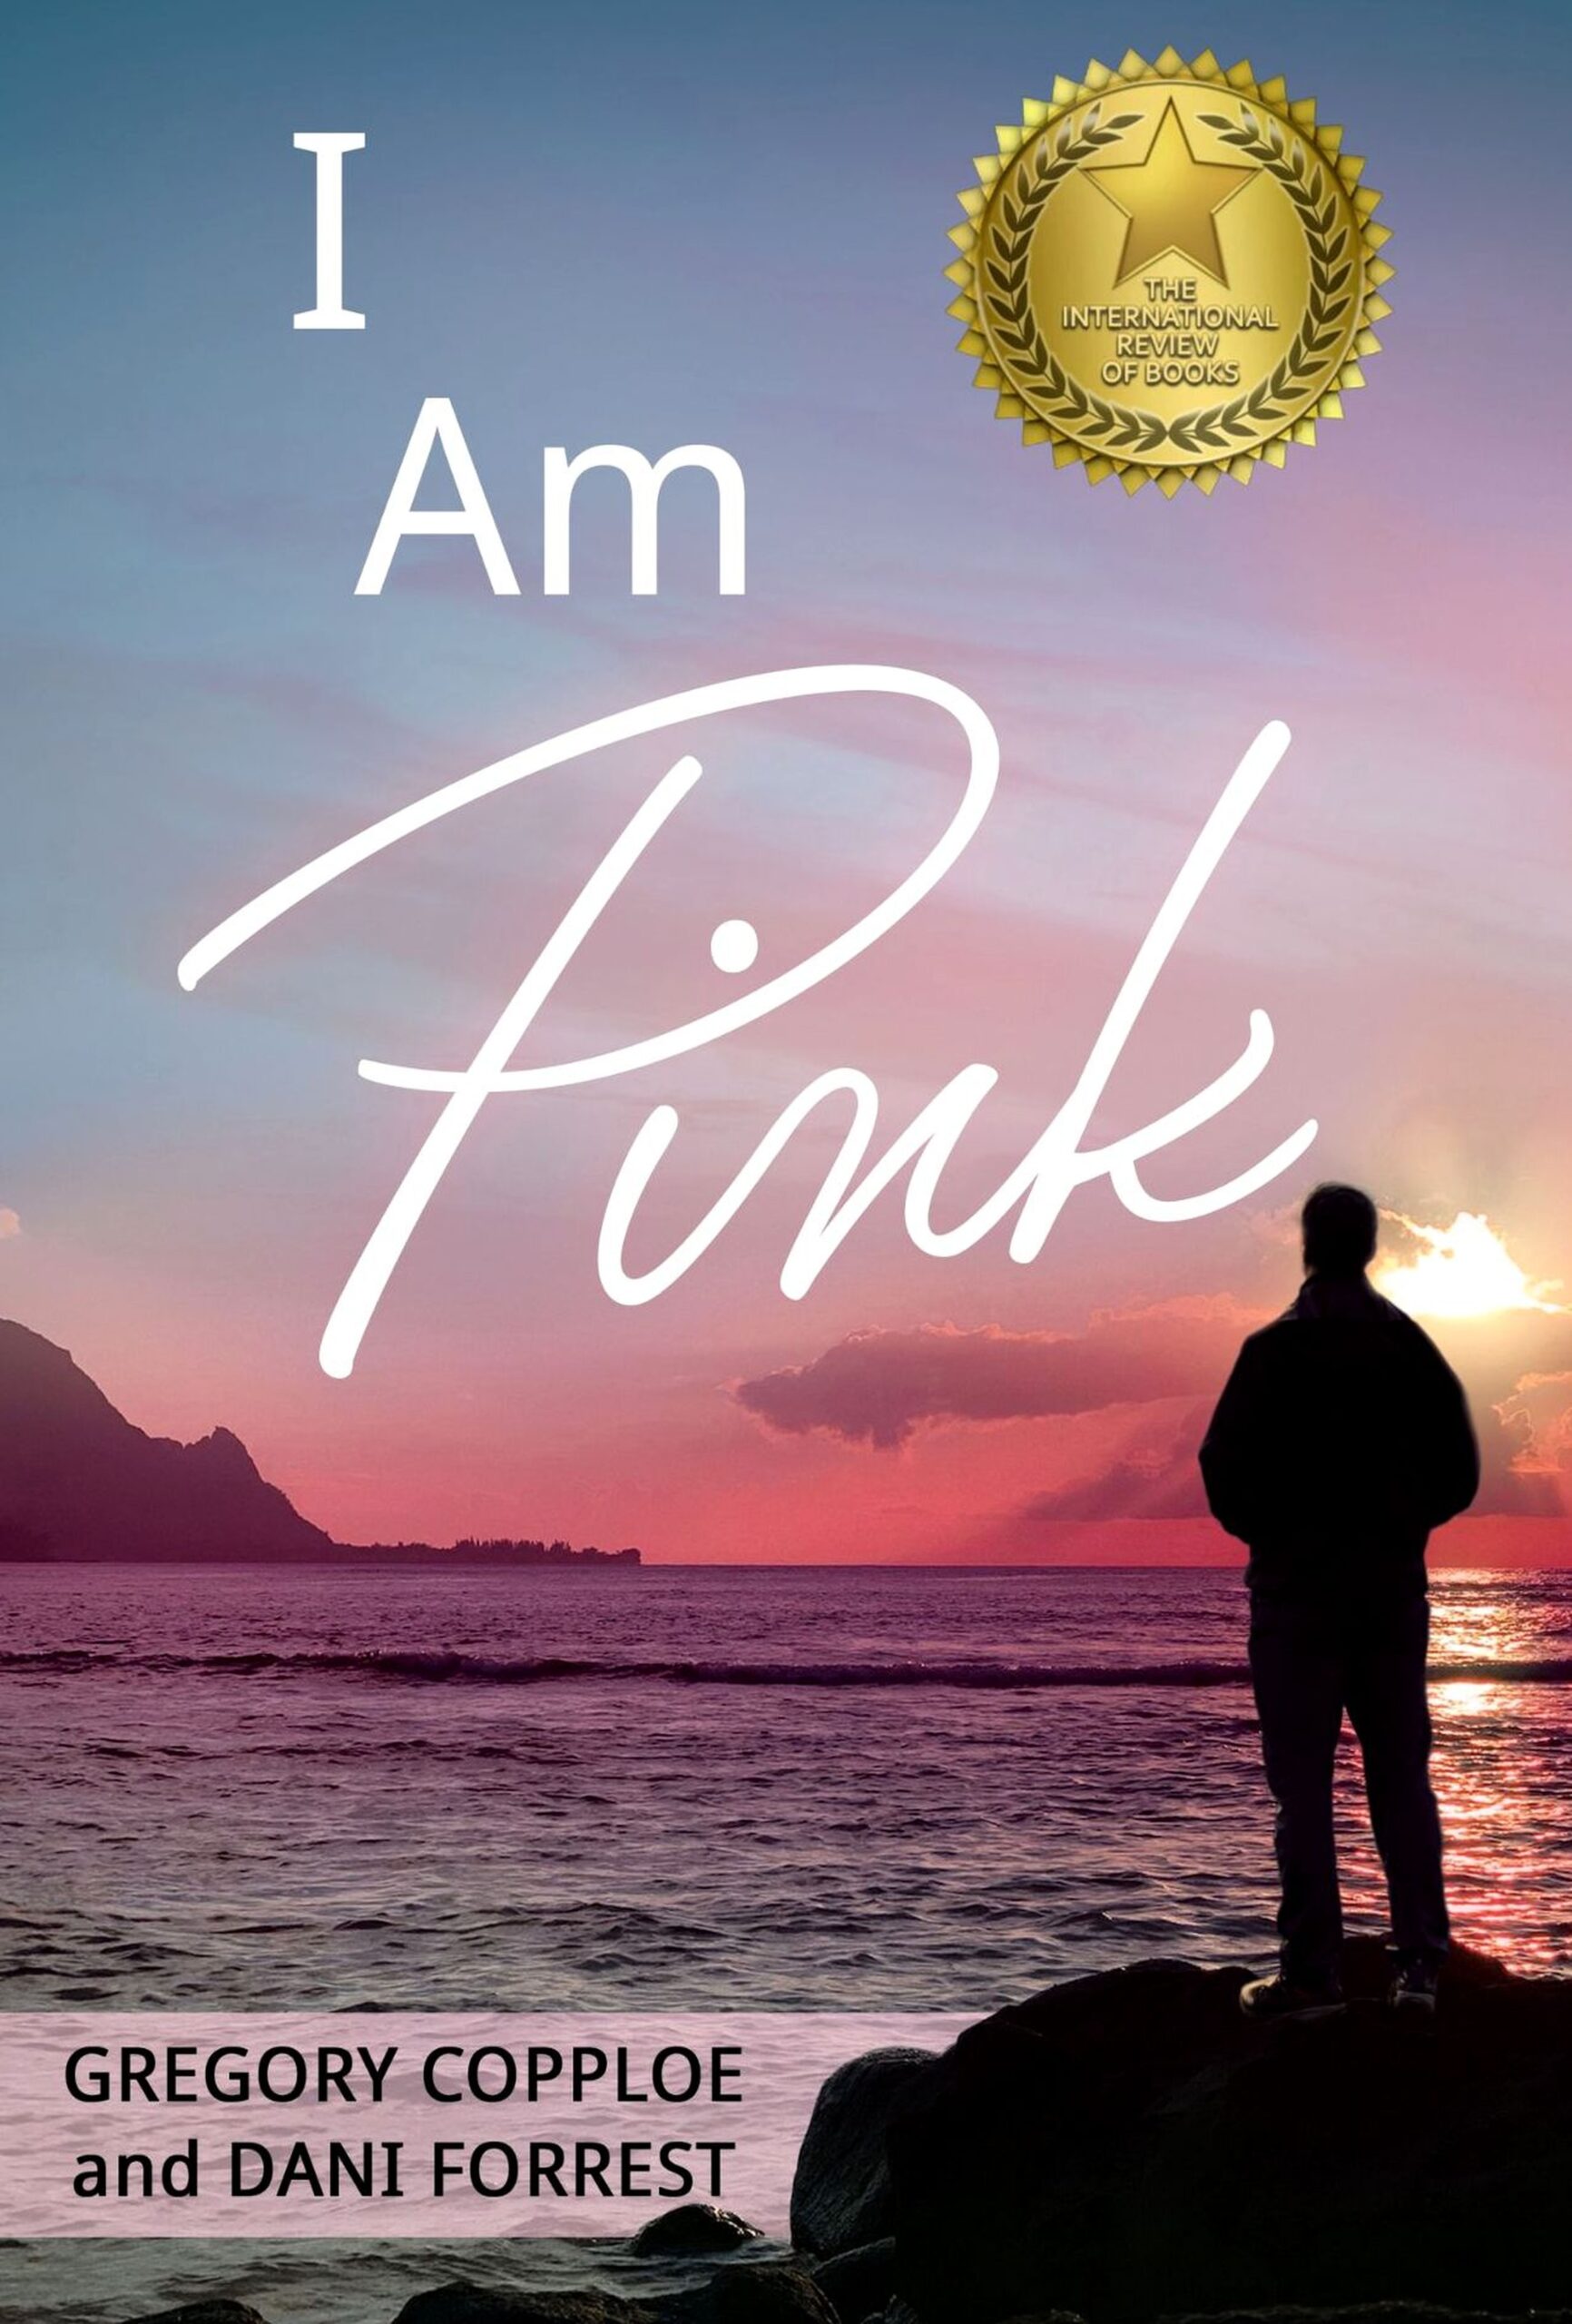 I Am Pink by Gregory Copploe and Dani Forrest